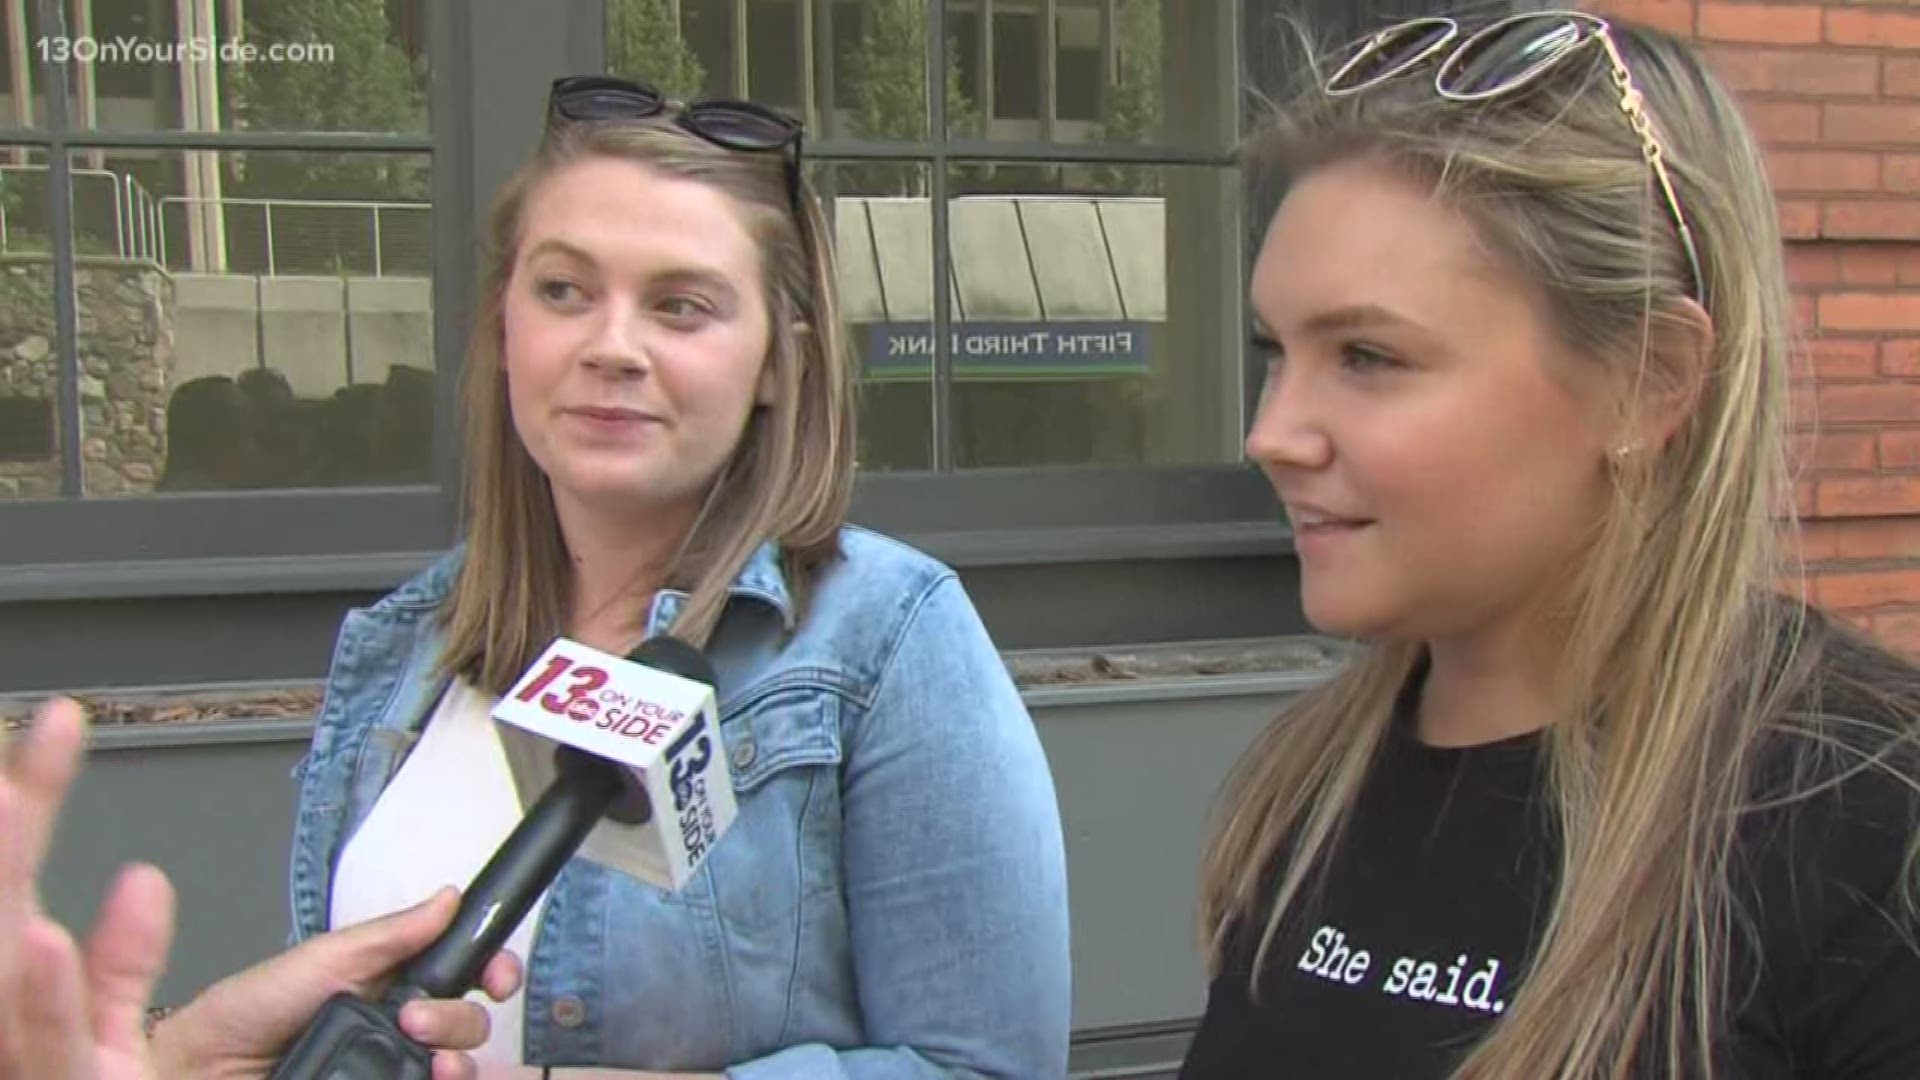 We hit the streets on downtown Grand Rapids to find out what voters are looking for in a candidate ahead of the debates in Detroit and the 2020 election.